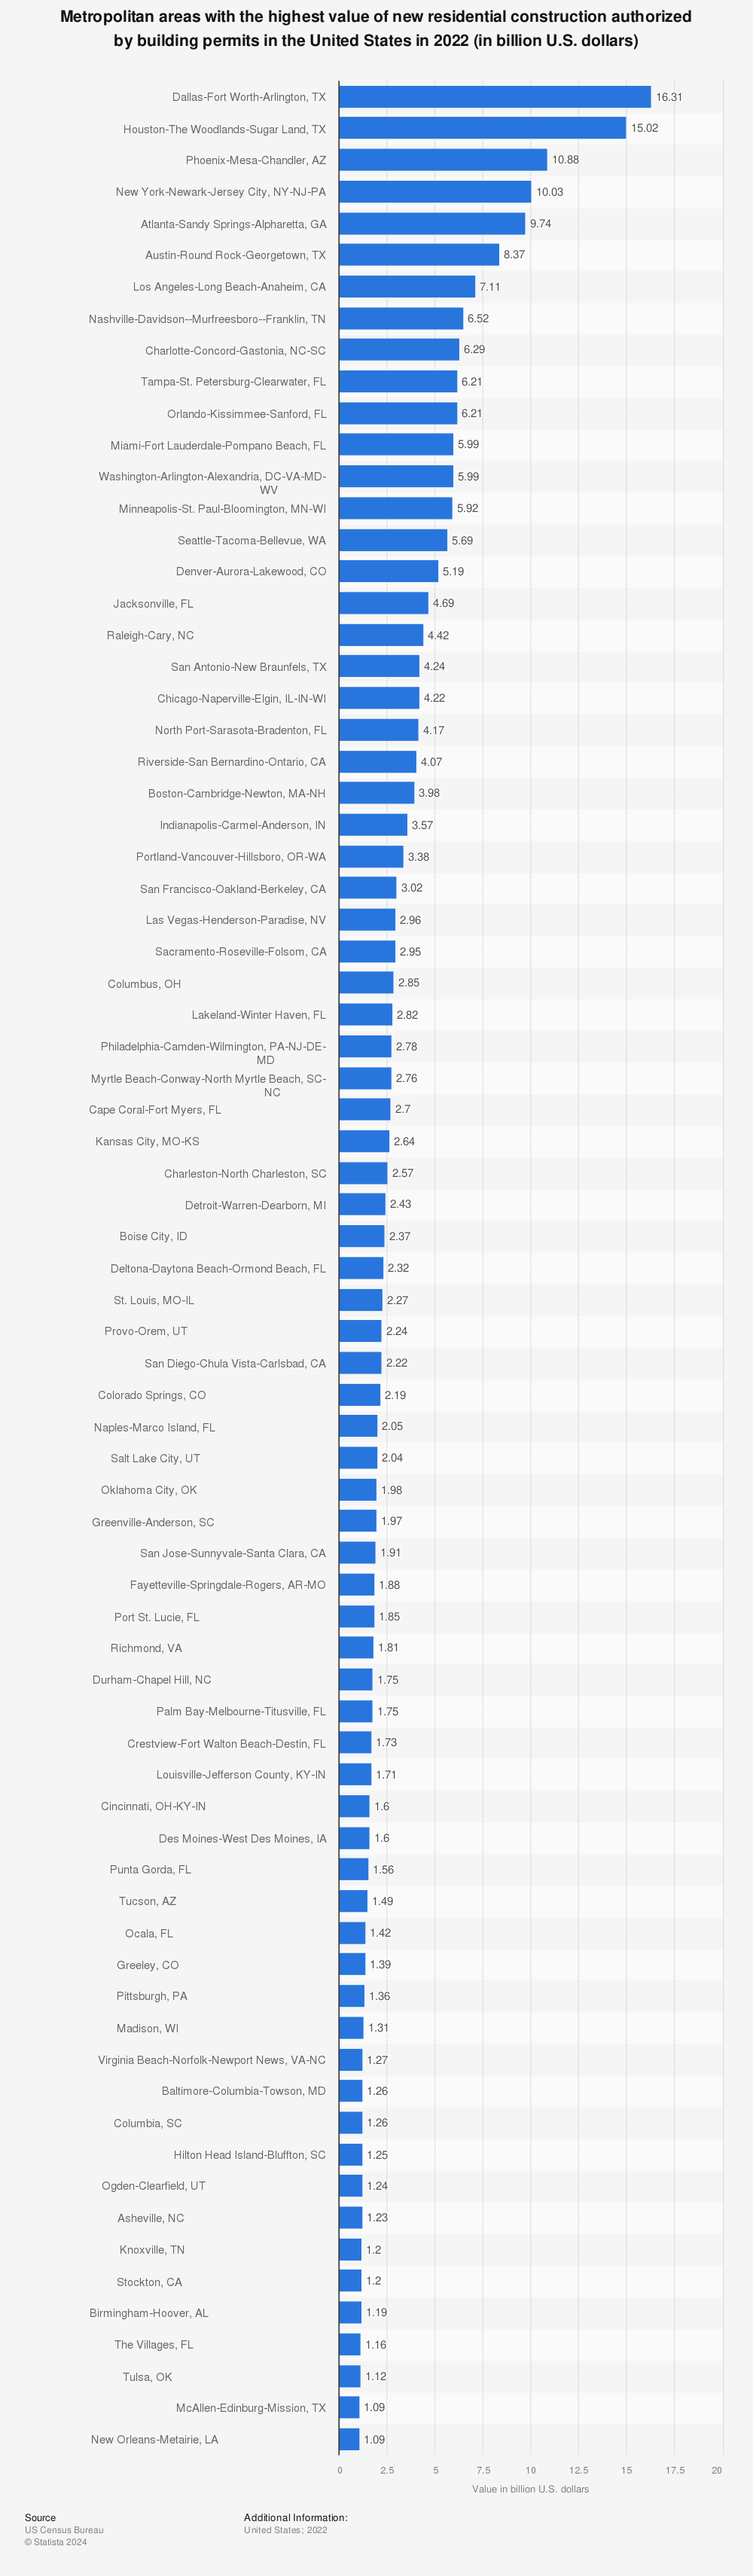 Statistic: The 50 metropolitan areas with the highest value of new residential construction authorized by building permits in the United States in 2020 (in billion U.S. dollars) | Statista